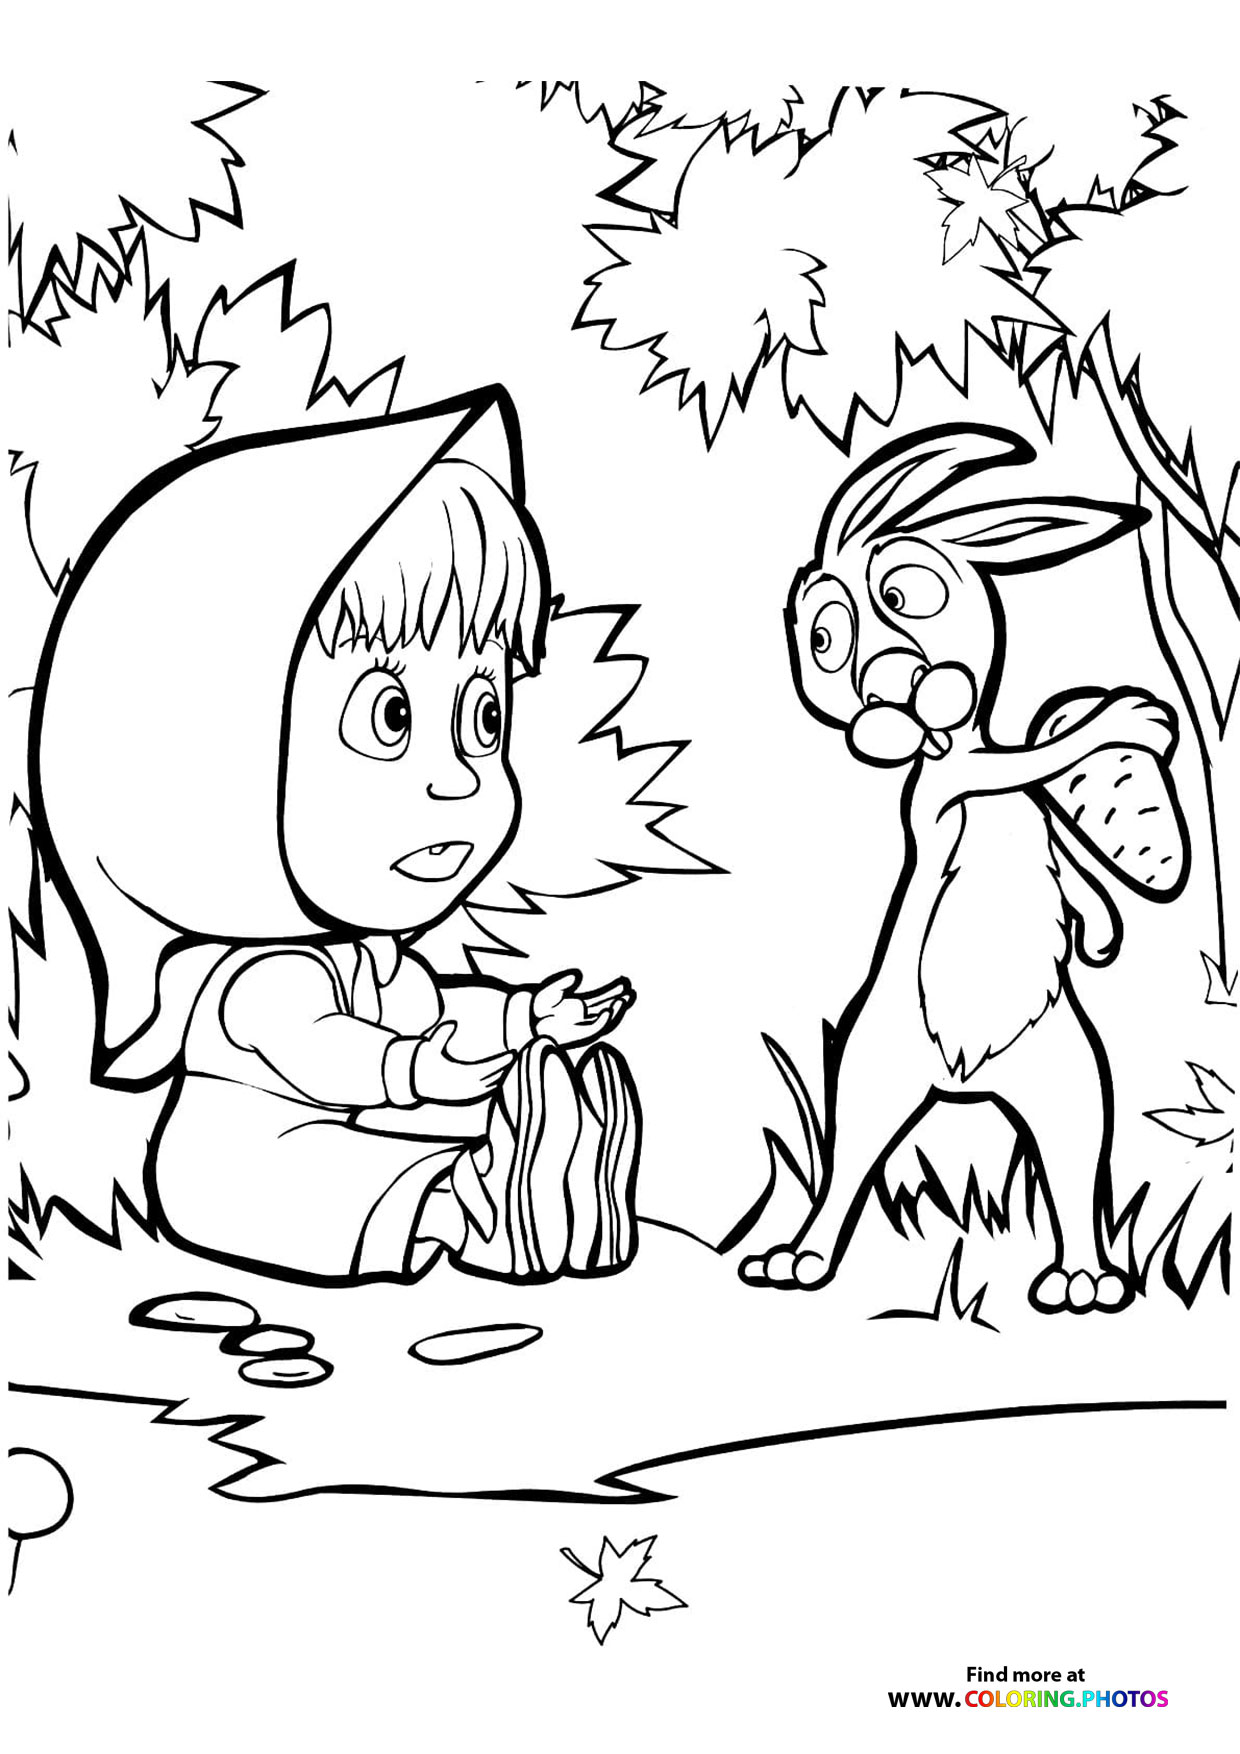 Masha and the Bear - Coloring Pages for kids | Free and easy print